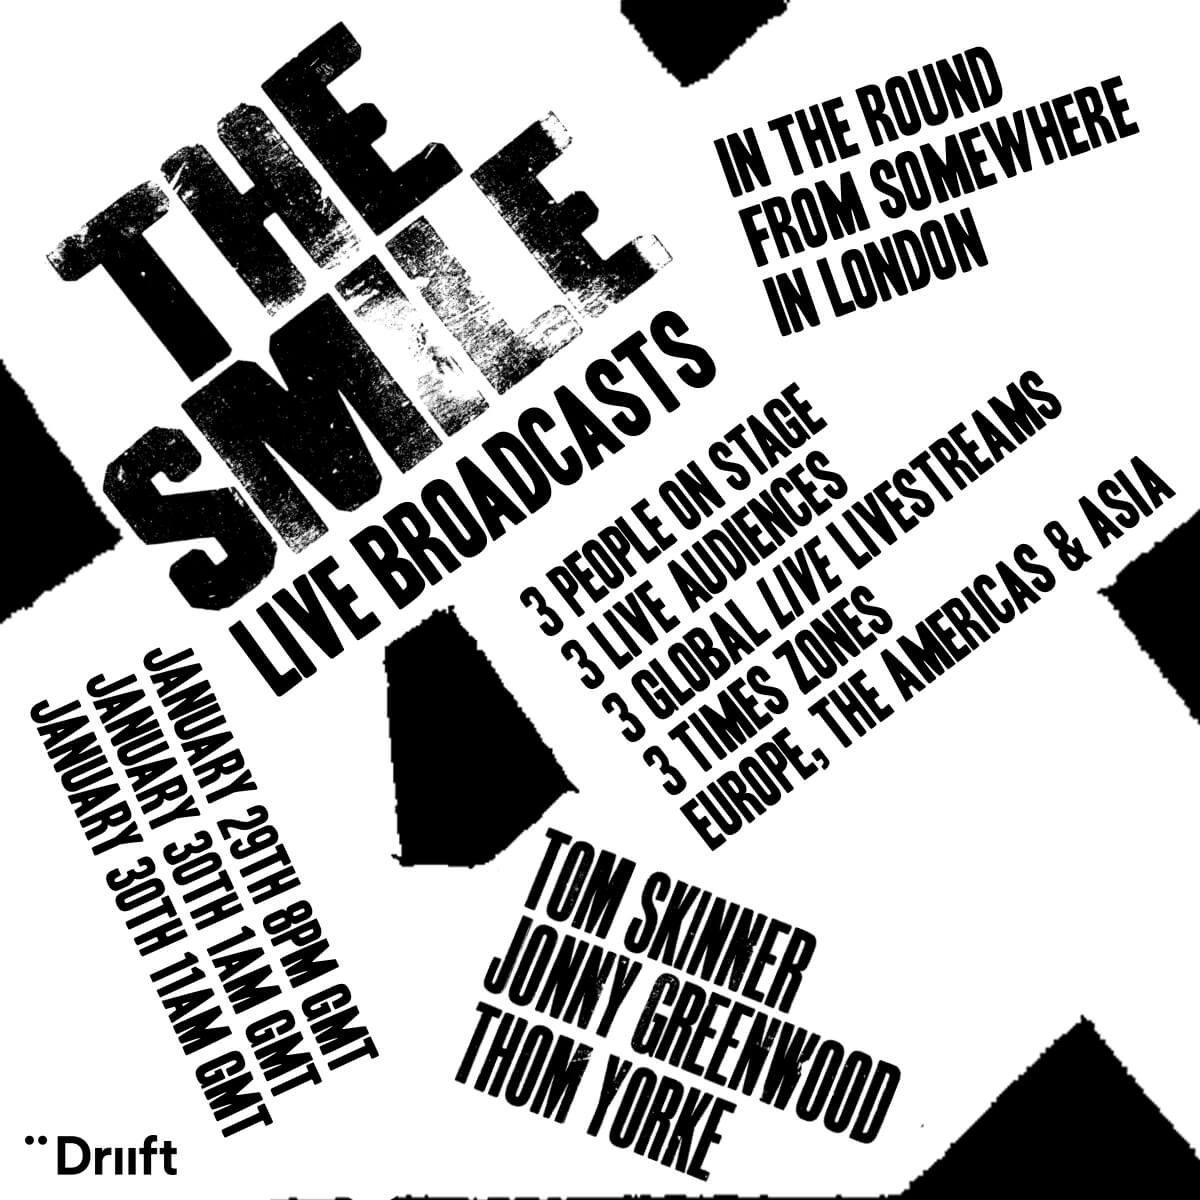 The Smile, which includes Radiohead’s Thom Yorke and Jonny Greenwood and Sons Of Kemet’s Tom Skinner have shared new single "The Smoke"